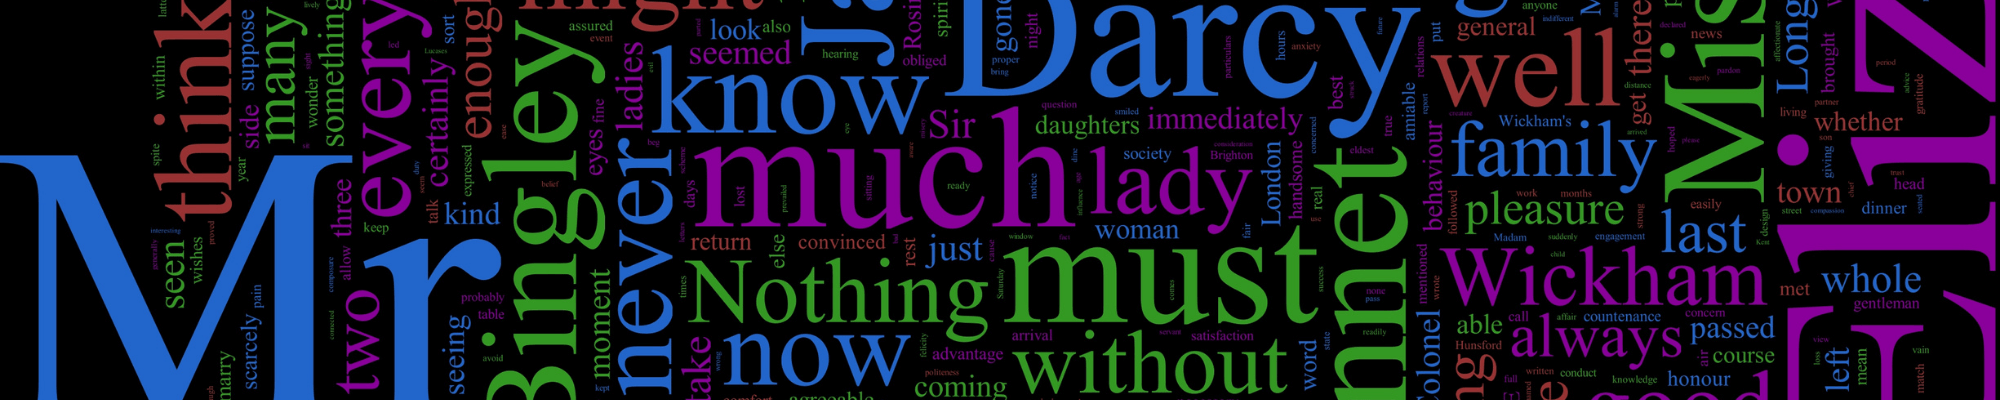 word cloud from Pride and Prejudice